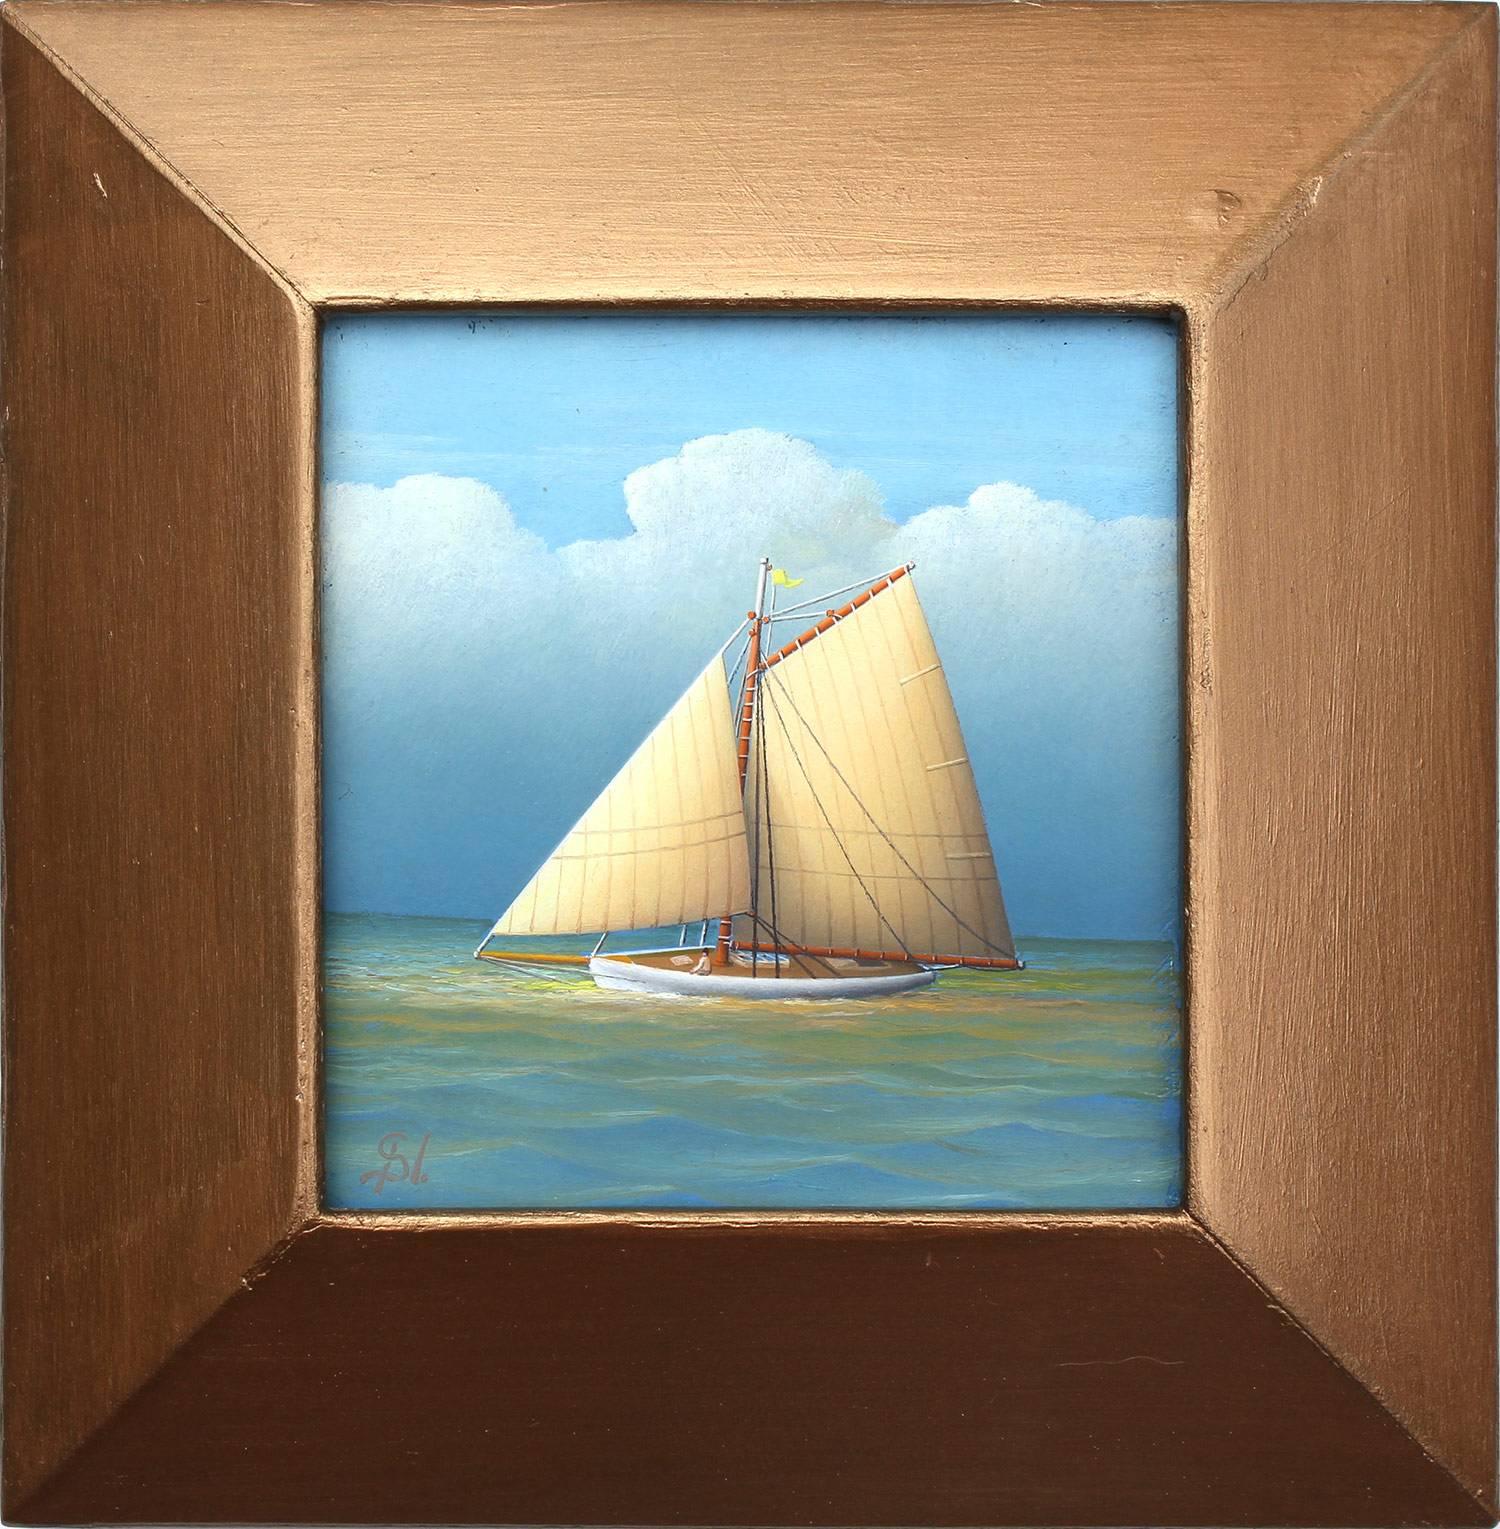 George Nemethy Landscape Painting - "Sailing at Dusk" Realist Oil Painting on Canvas Board of Sailboat in Open Sea